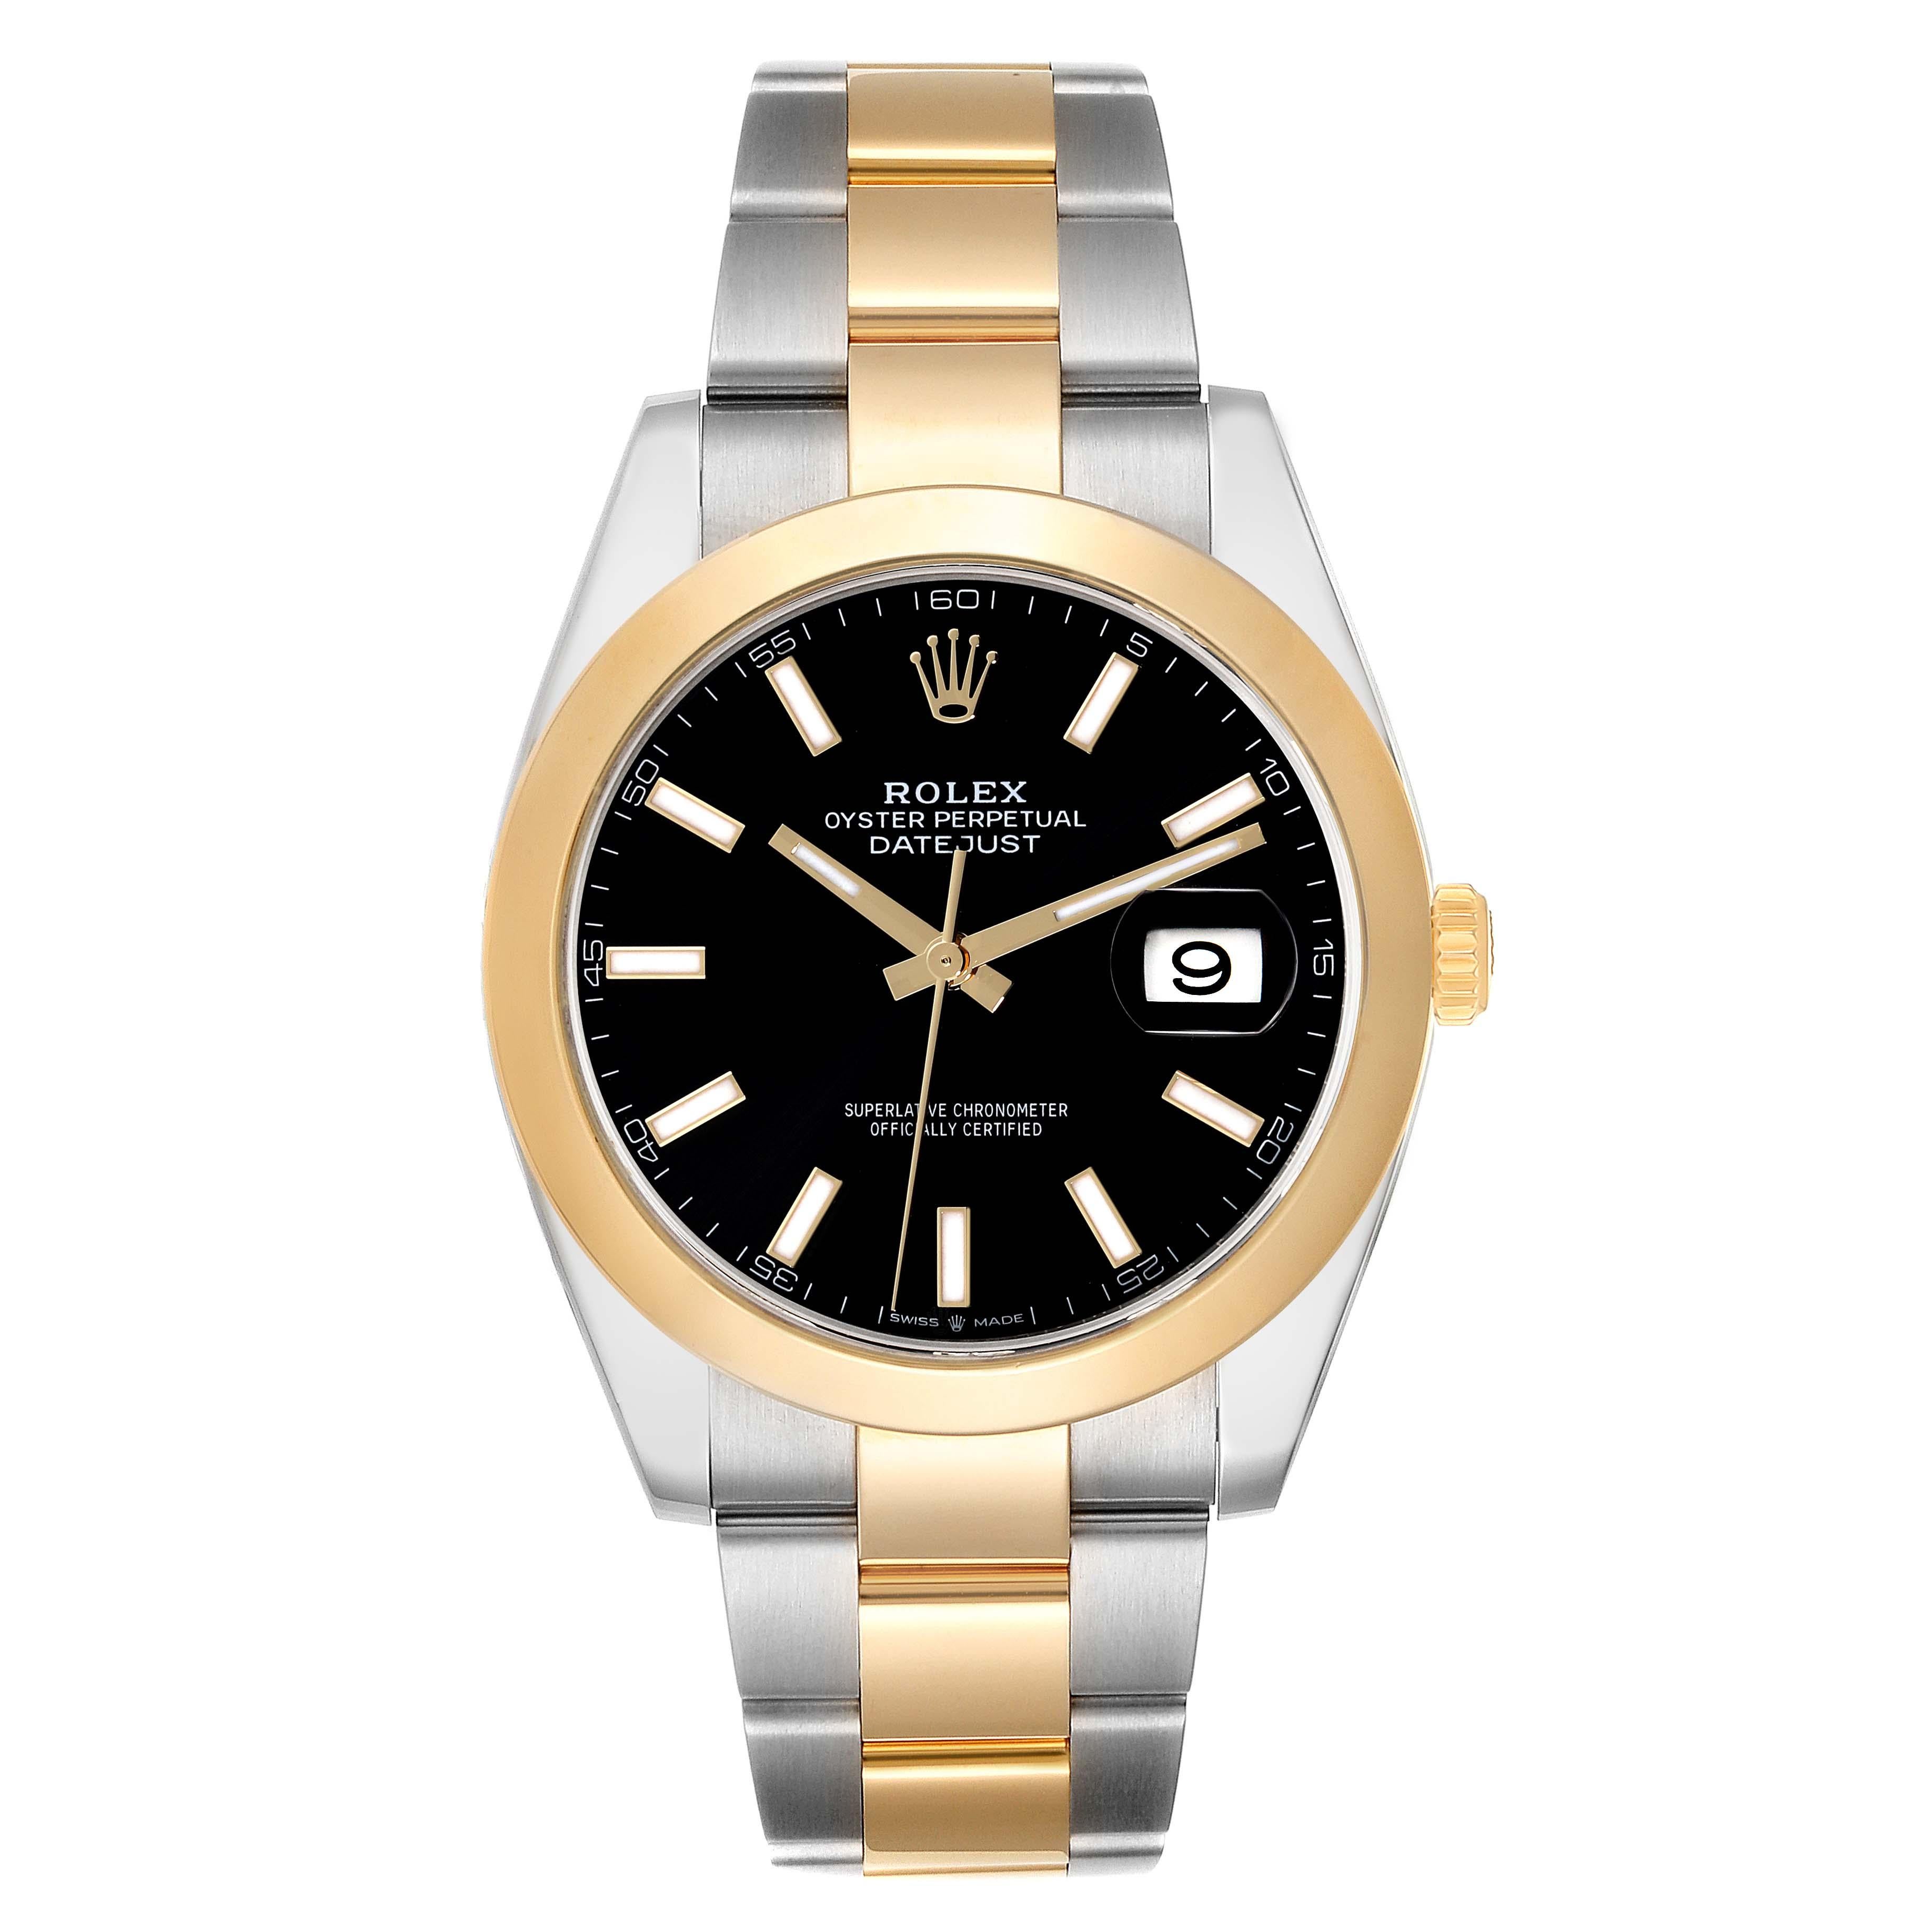 Rolex Datejust 41 Steel Yellow Gold Black Dial Mens Watch 126303 Box Card. Officially certified chronometer self-winding movement. Stainless steel and 18K yellow gold case 41.0 mm in diameter. Rolex logo on a crown. 18K yellow gold smooth domed